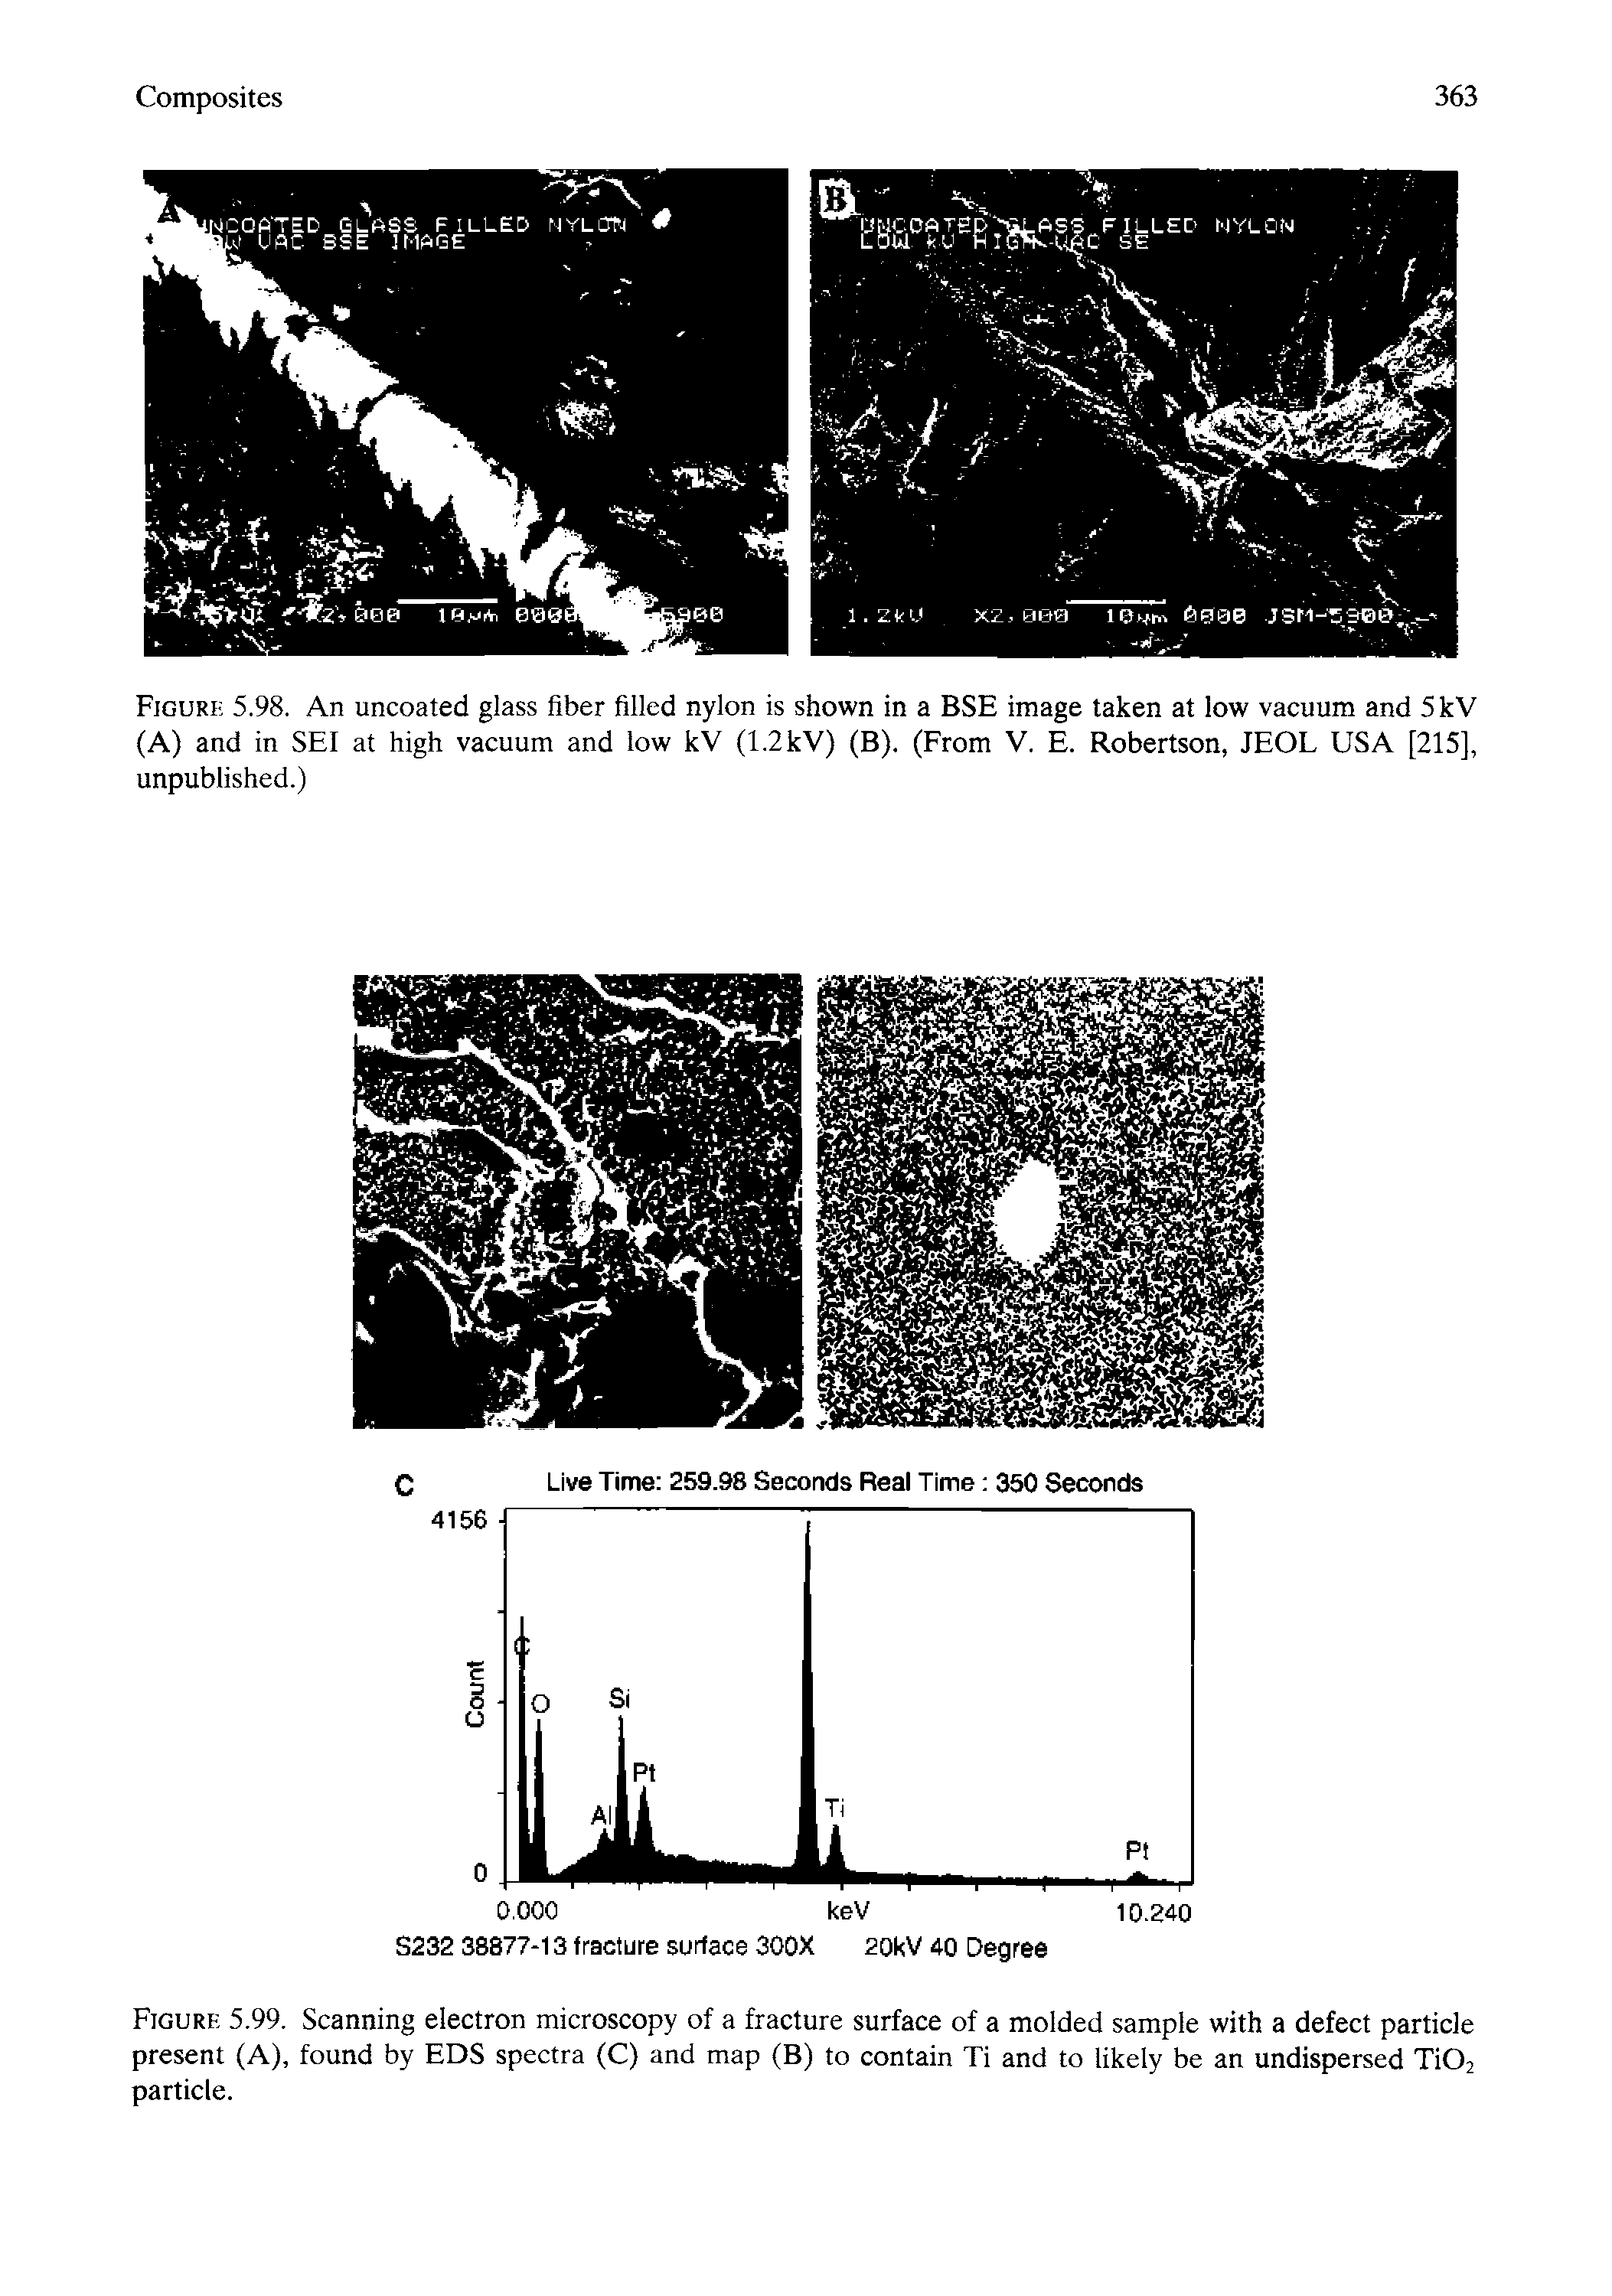 Figuri 5.98. An uncoated glass fiber filled nylon is shown in a BSE image taken at low vacuum and 5kV (A) and in SEI at high vacuum and low kV (1.2kV) (B). (From V. E. Robertson, JEOL USA [215], unpublished.)...